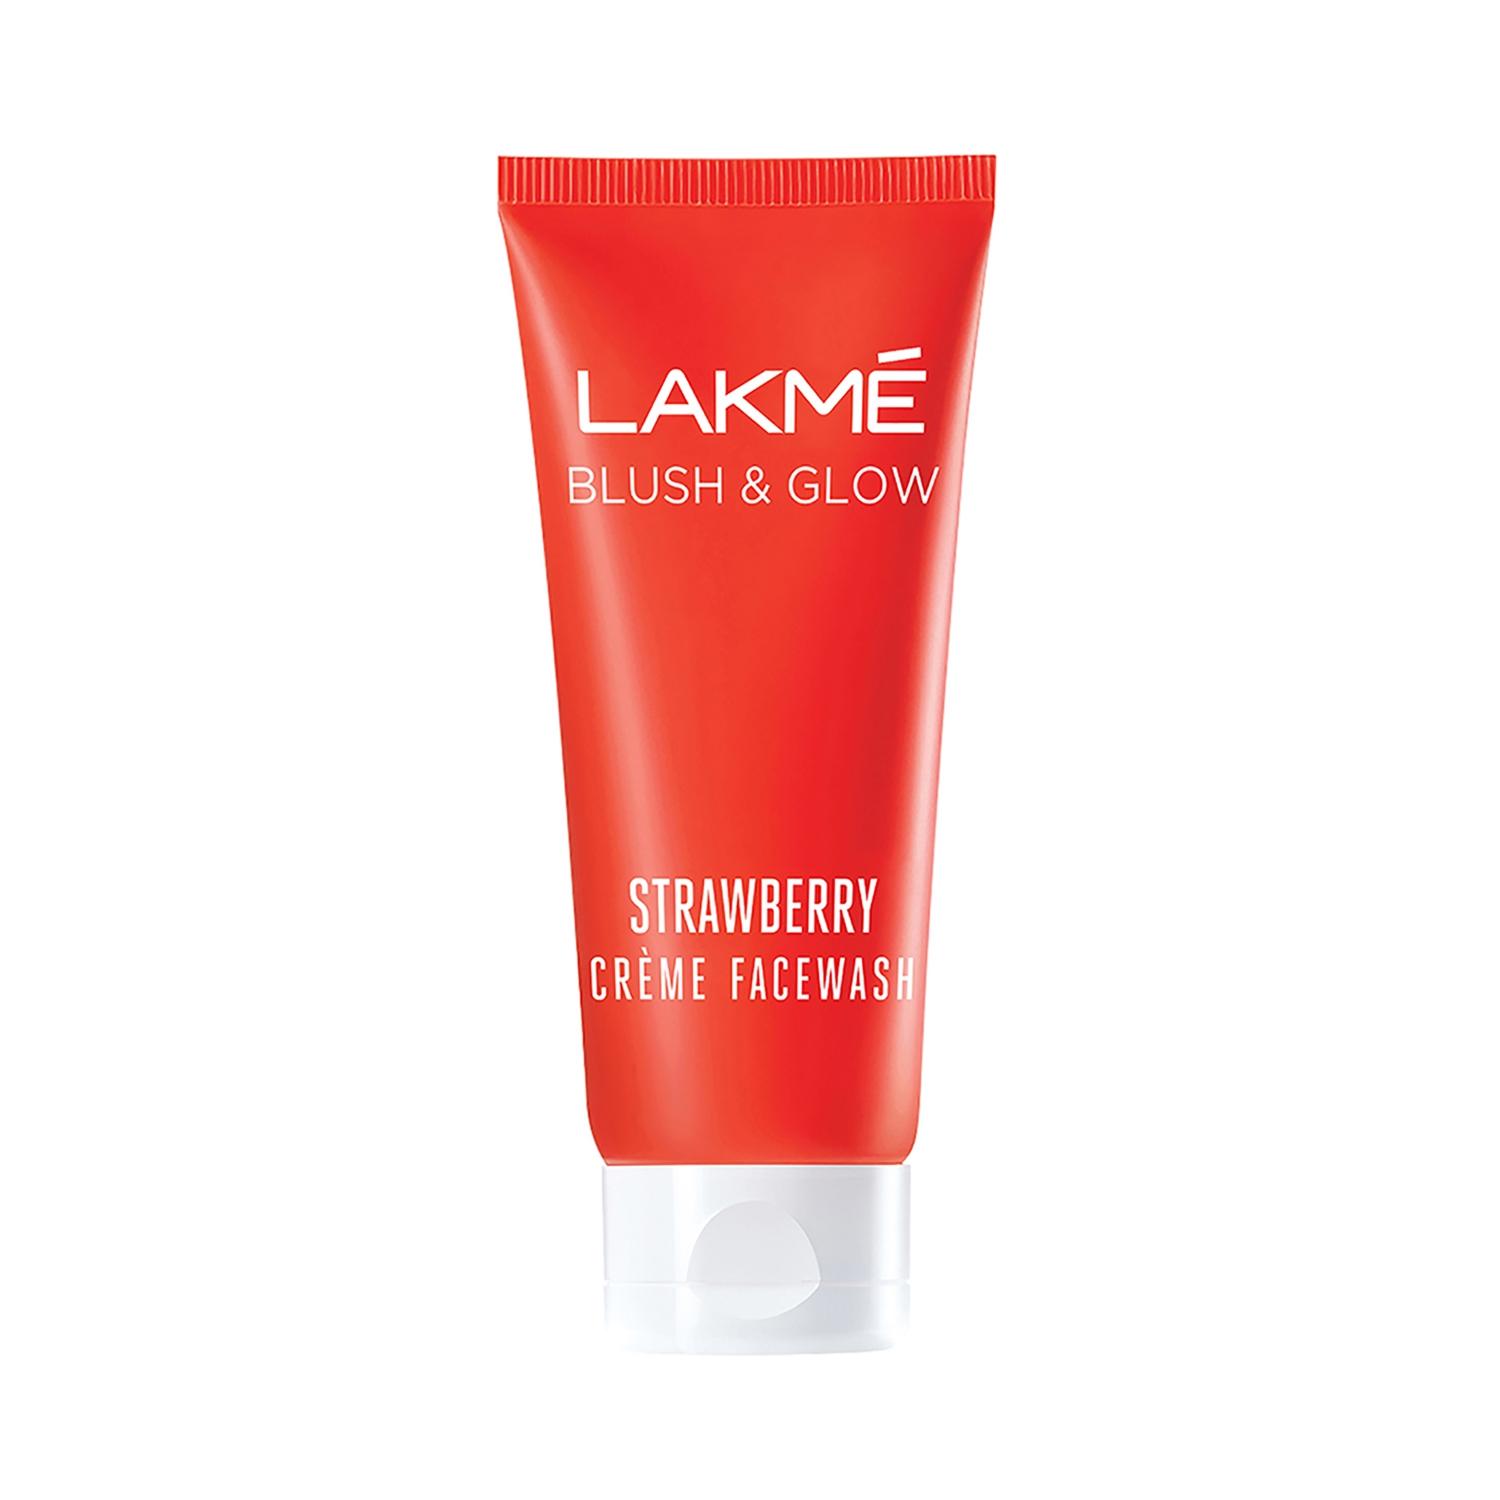 Lakme | Lakme Blush & Glow Strawberry Creme Face Wash With Strawberry Extract - (100g)